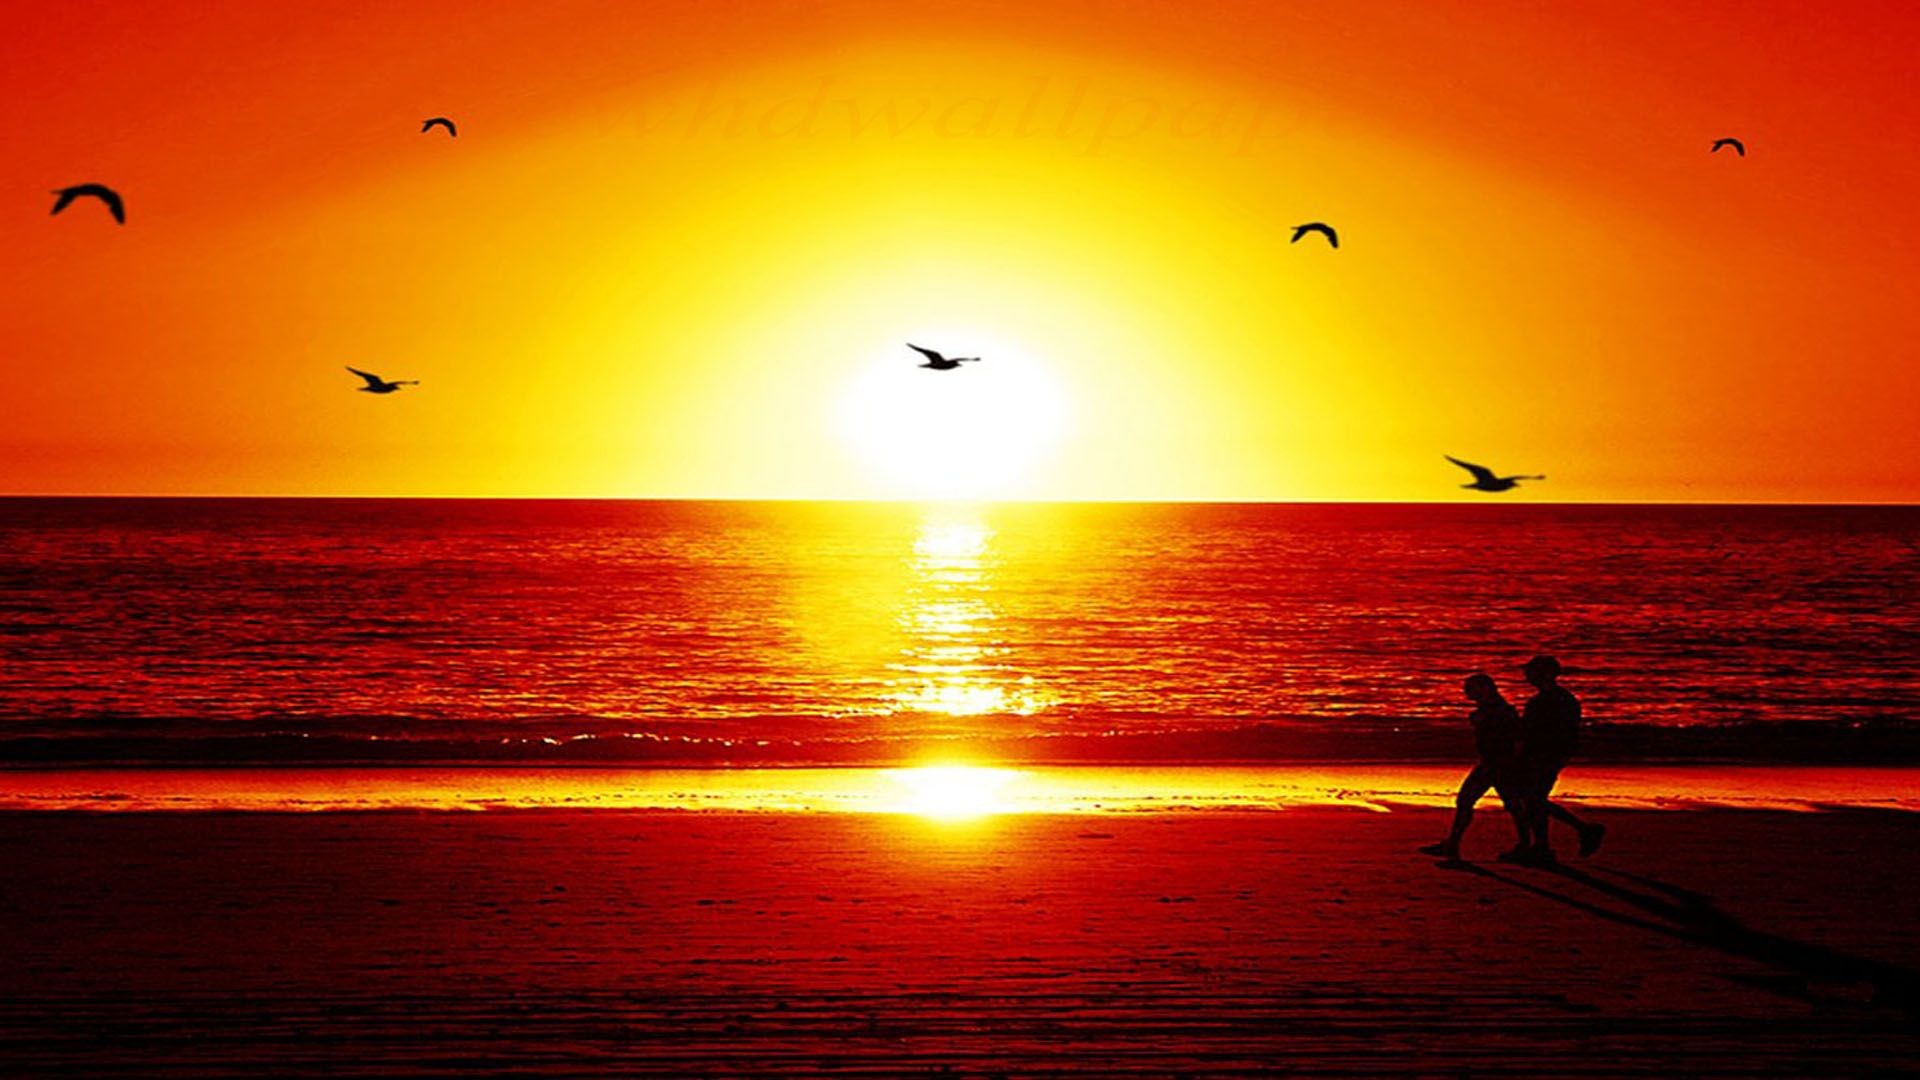 Sunset Wallpapers HD Wallpapers, Backgrounds, Images, Art Photos